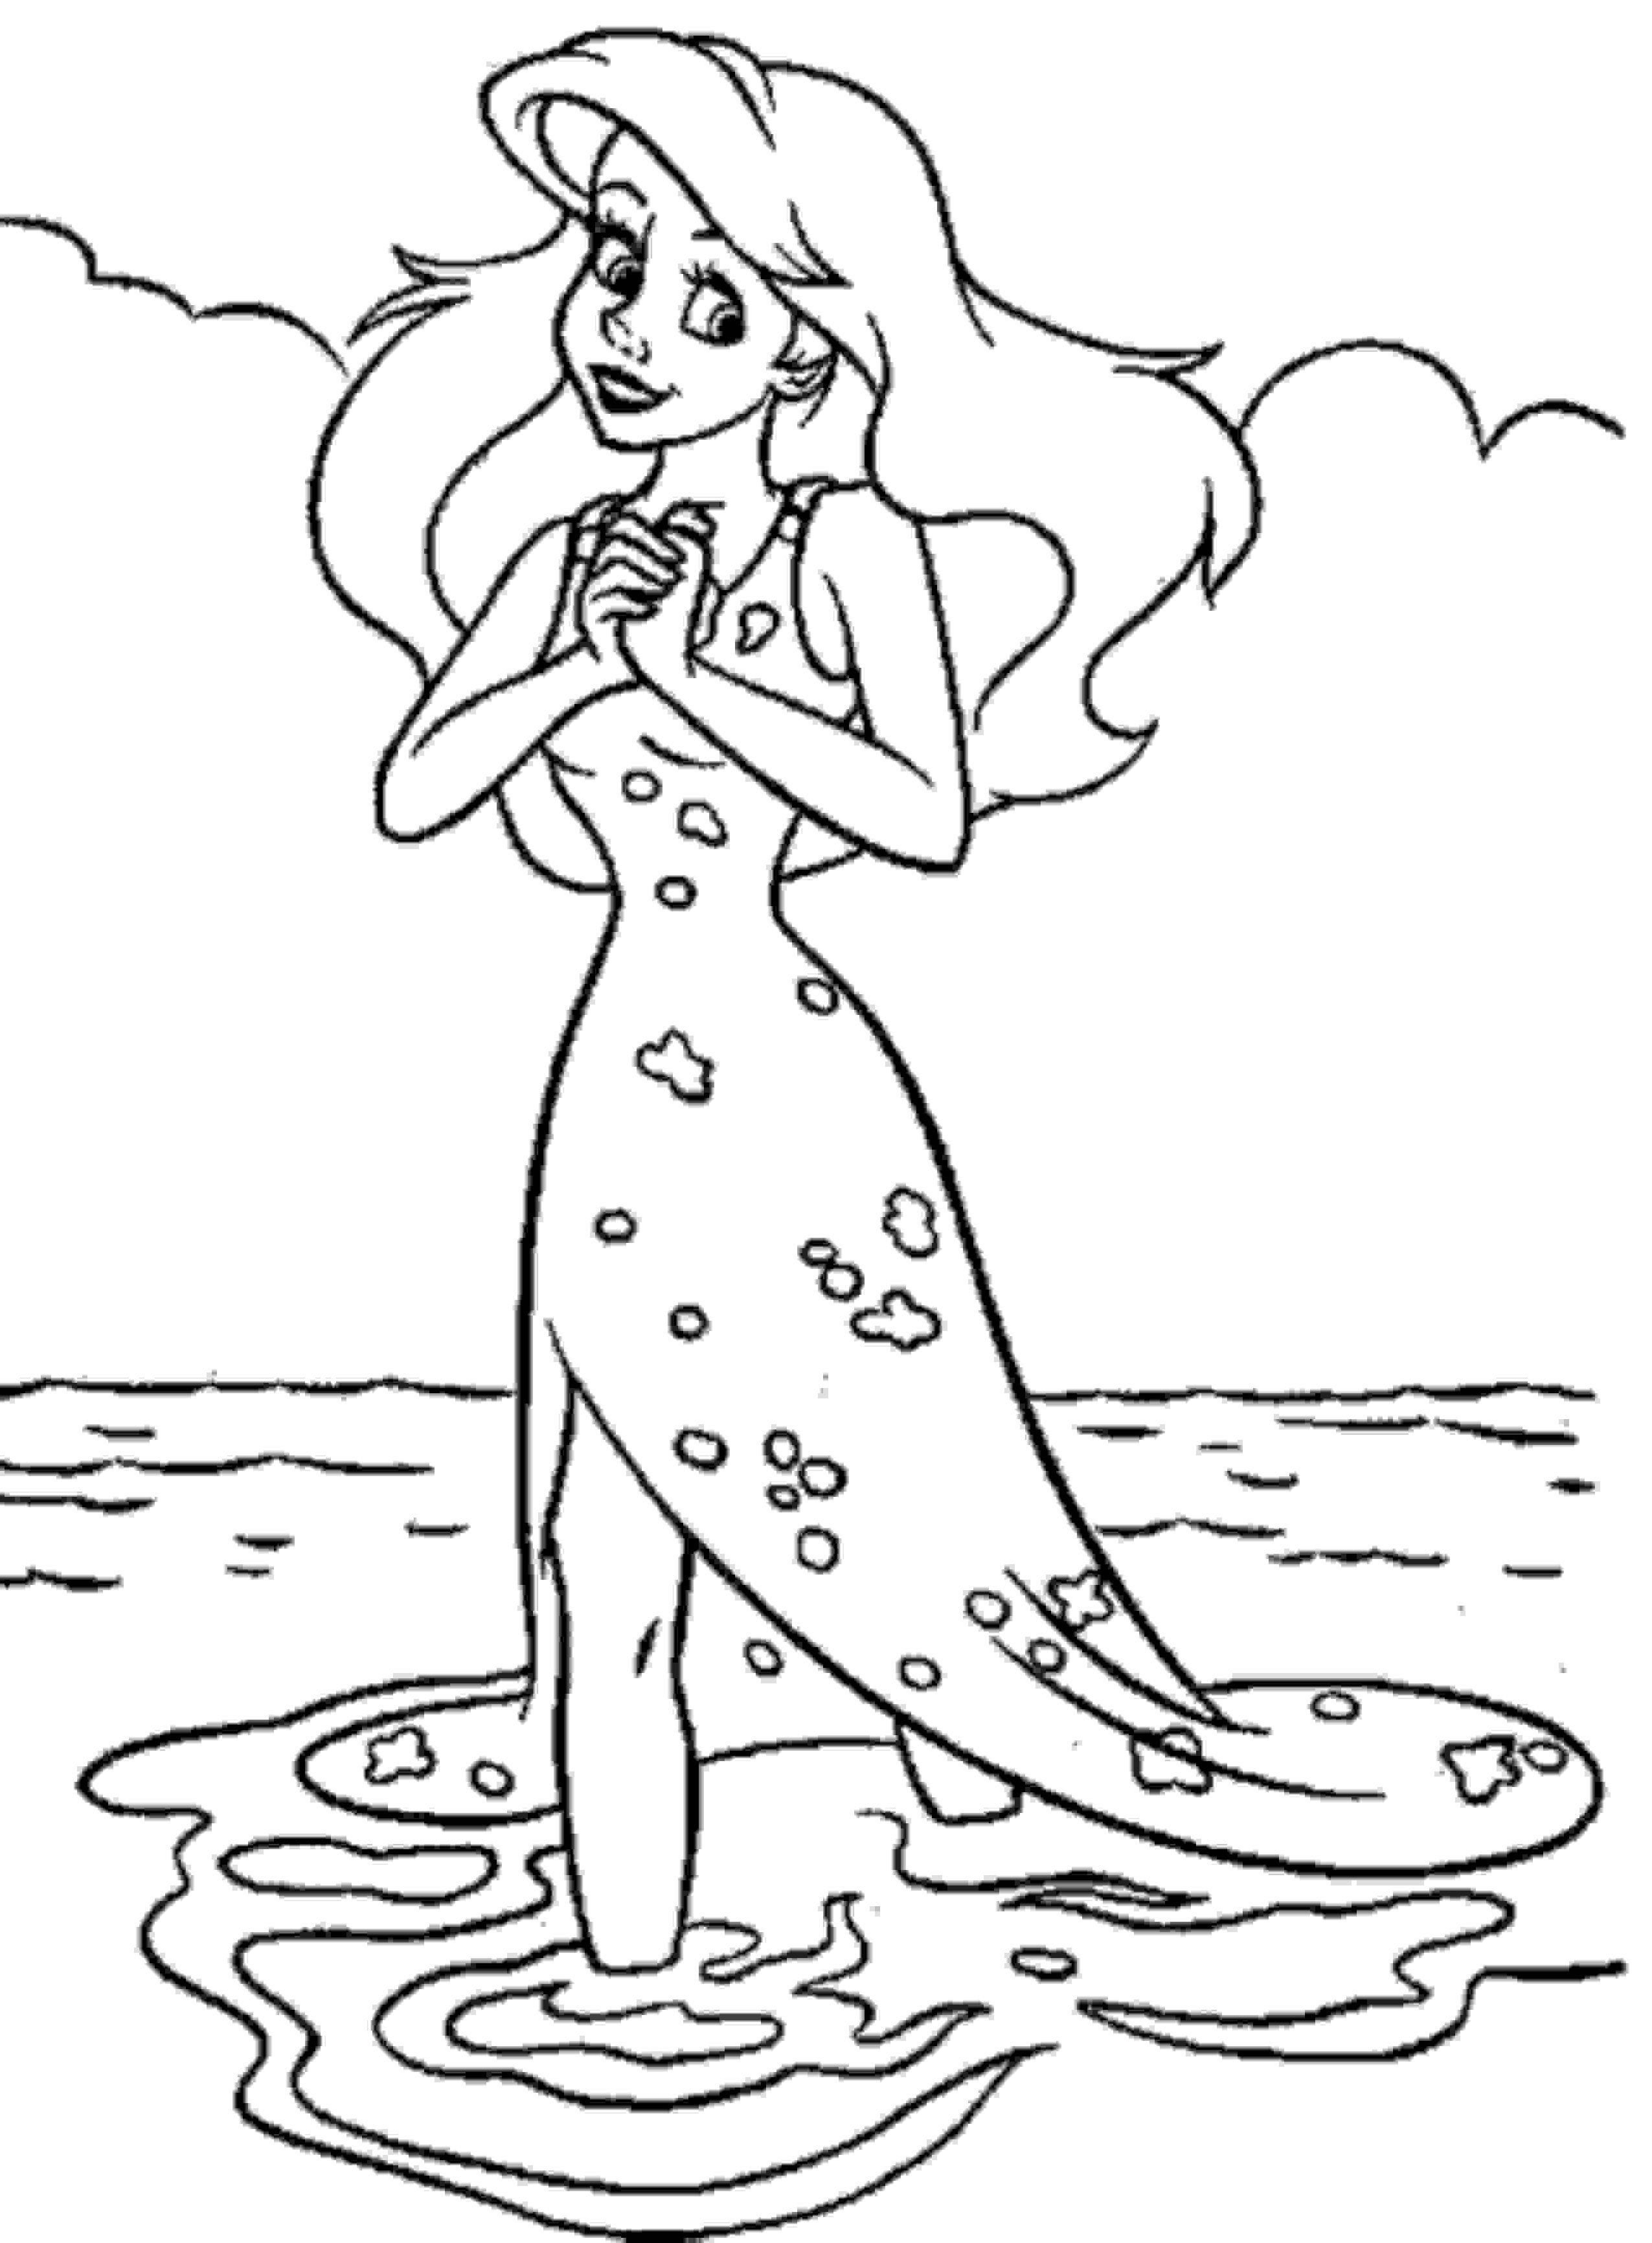 Coloring Pages Of Little Mermaid Coloring Ideas The Little Mermaid Coloring Pages Free To Print